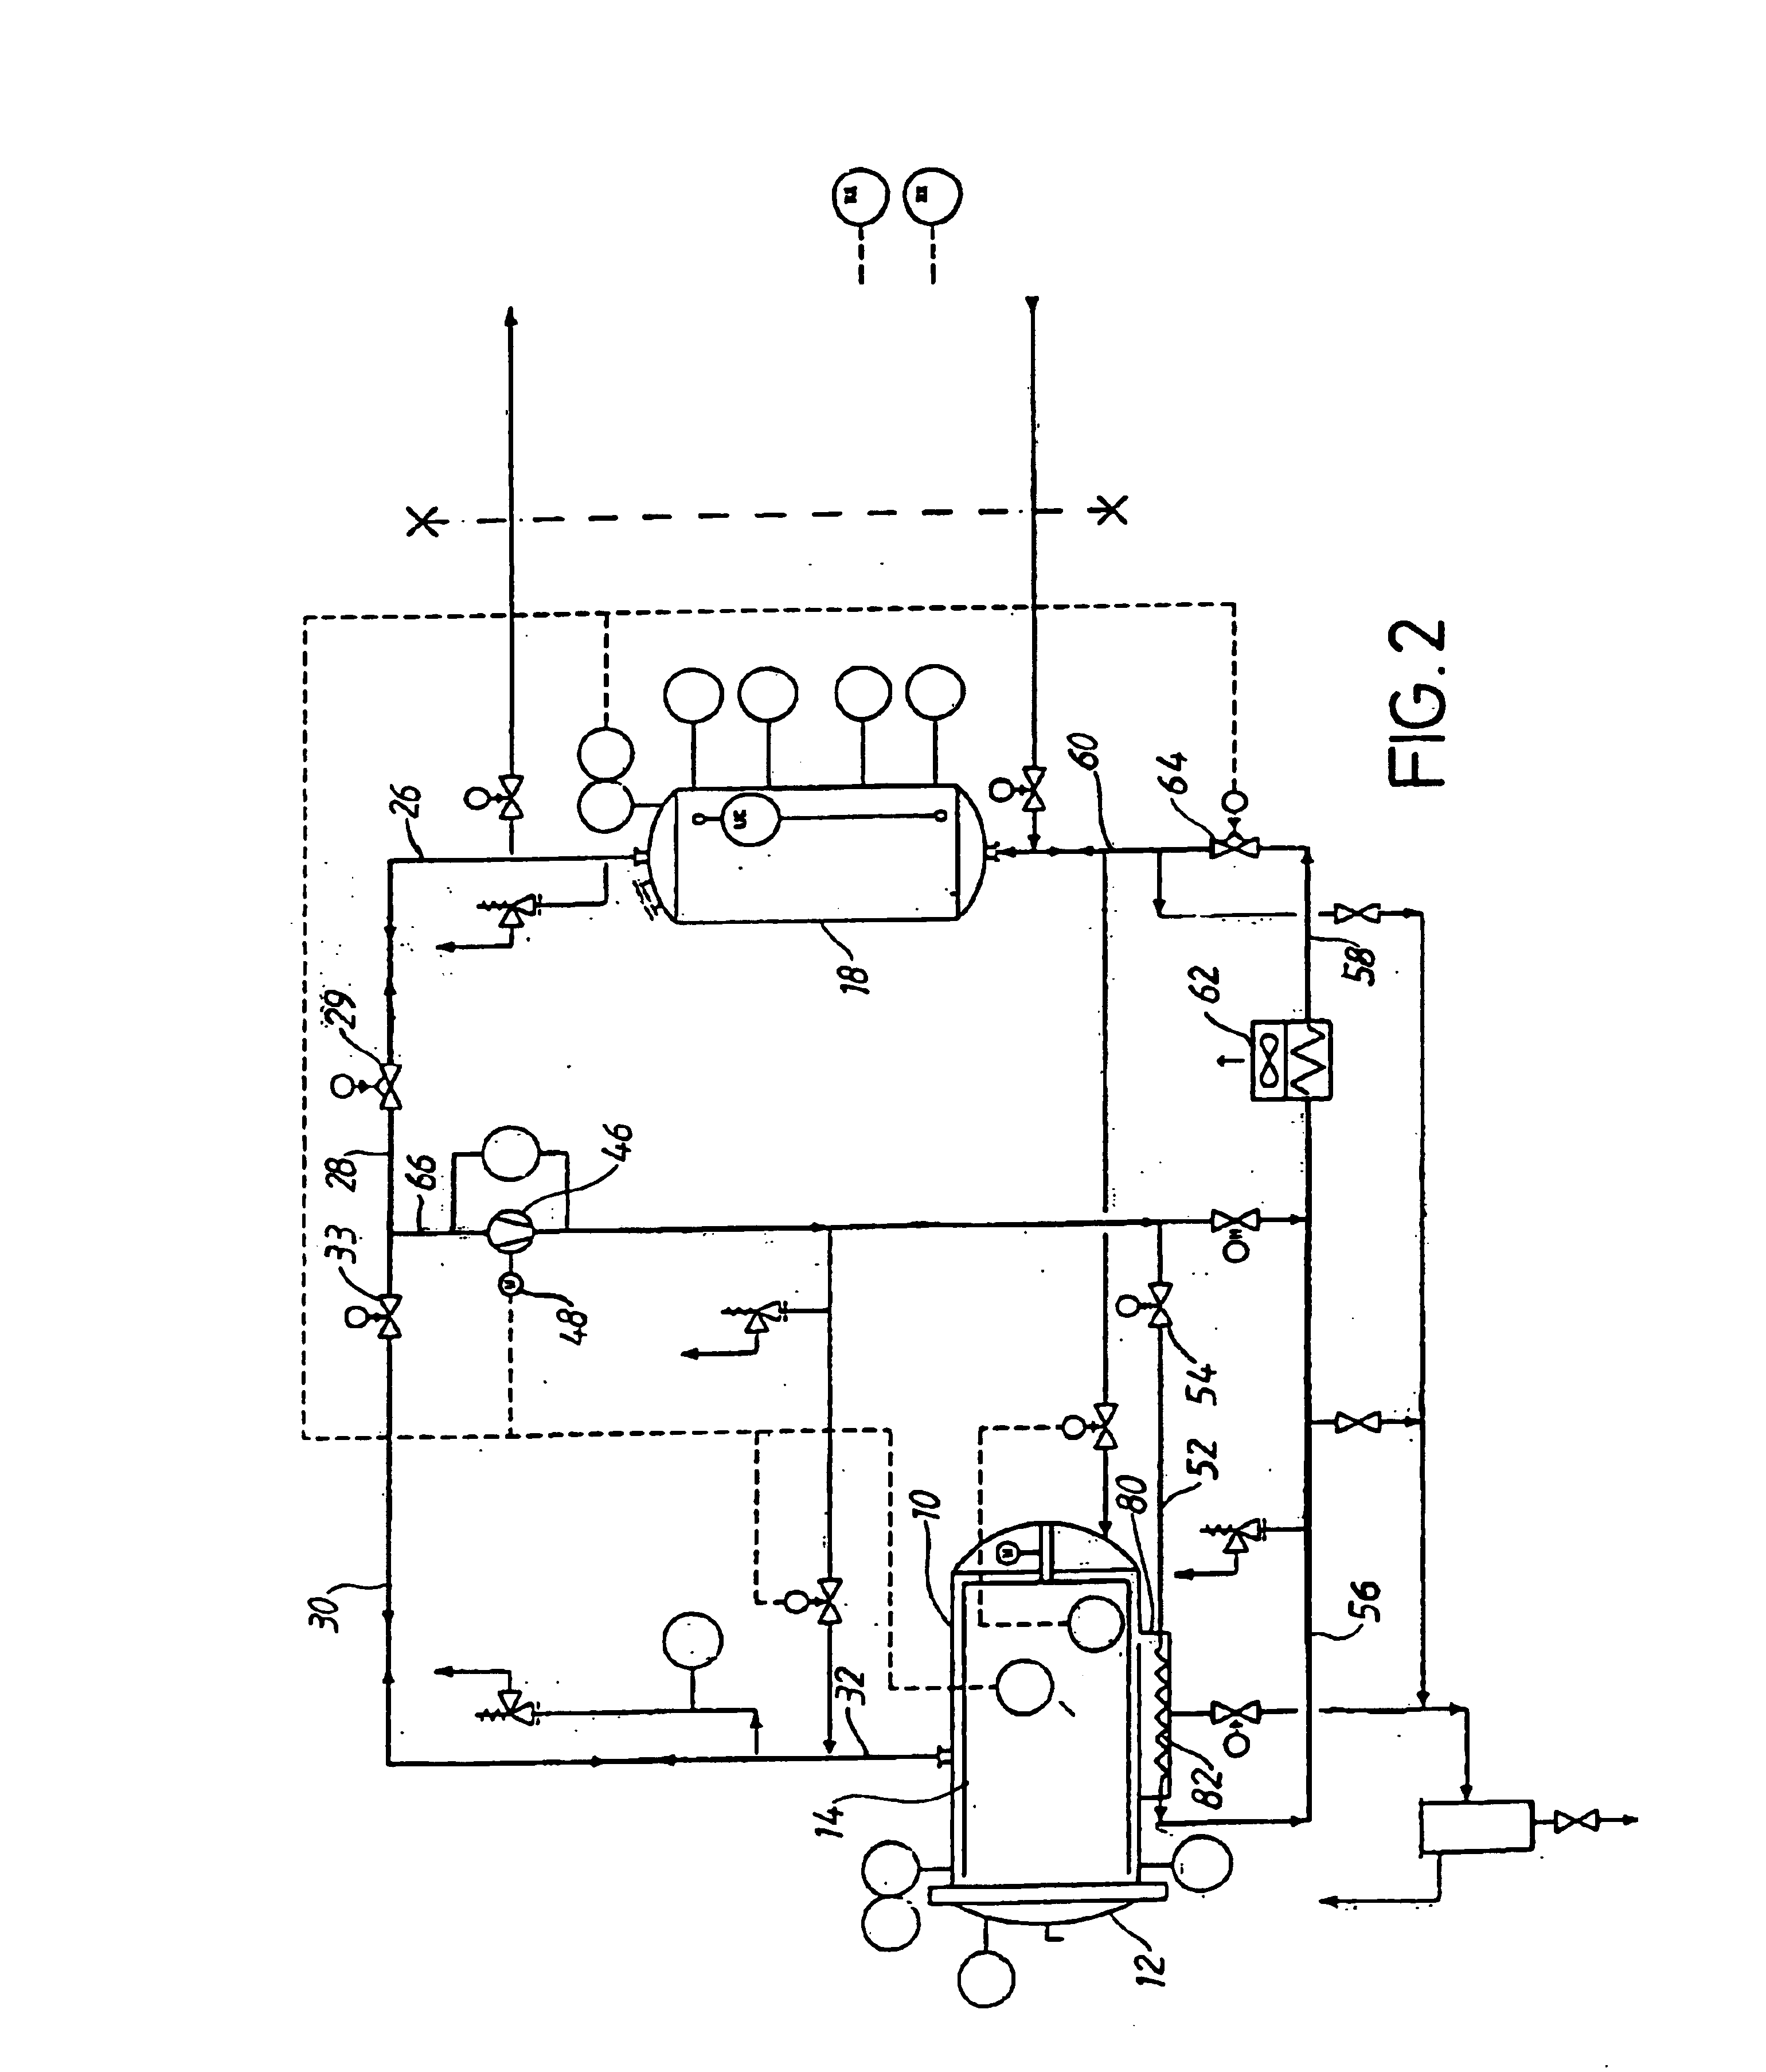 Apparatus for cleaning textiles with a densified liquid treatment gas